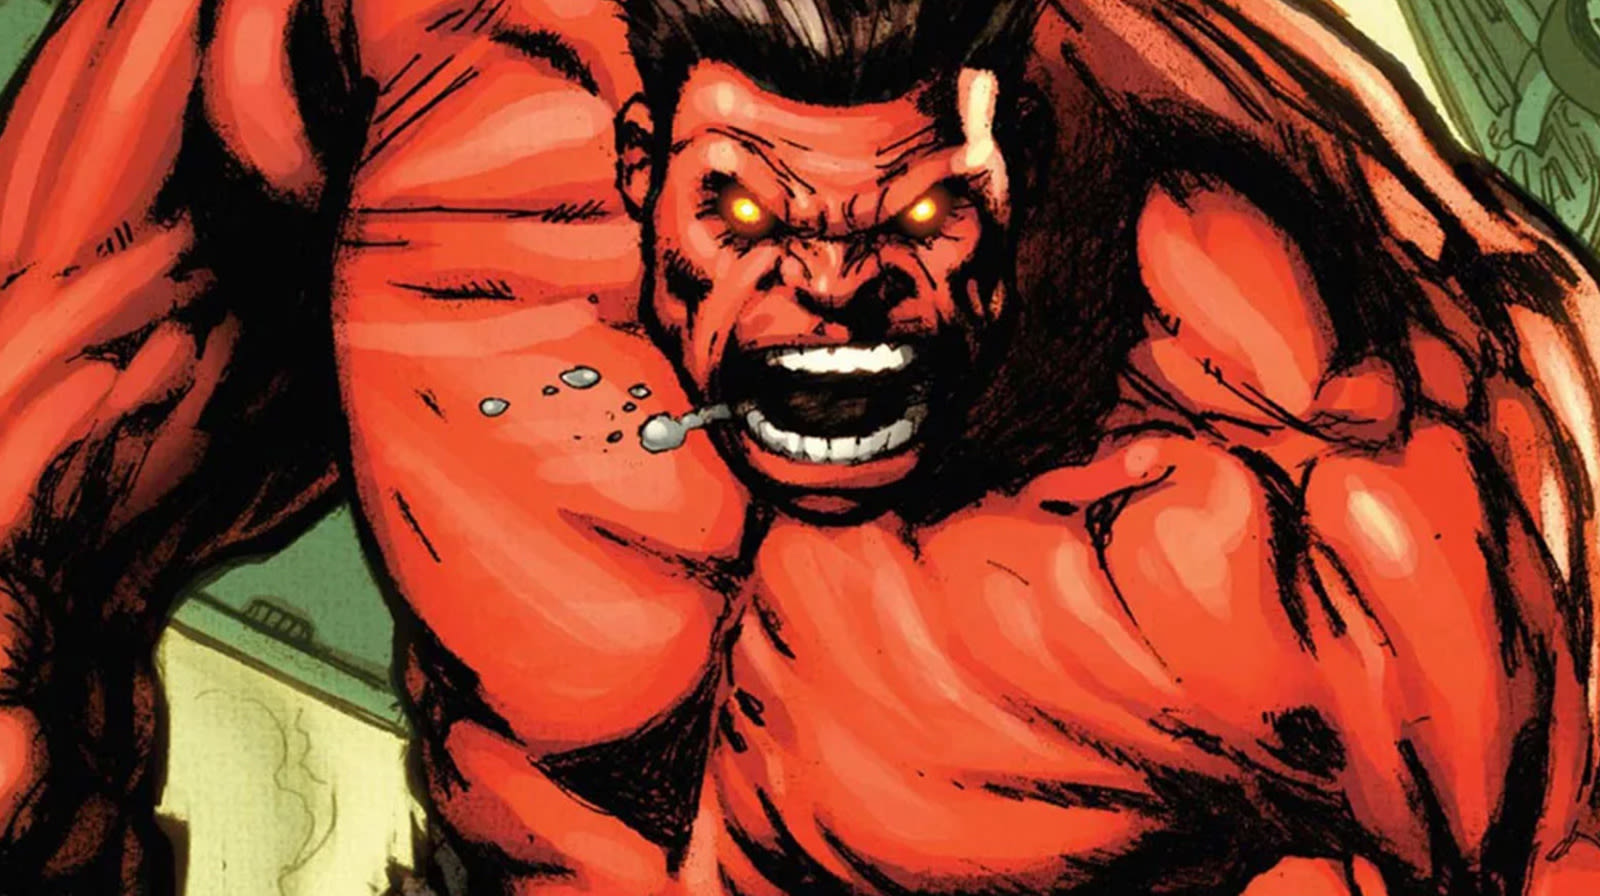 Captain America 4: The Harrison Ford Red Hulk Concept Art You Saw Is Fake (Thank God) - Looper